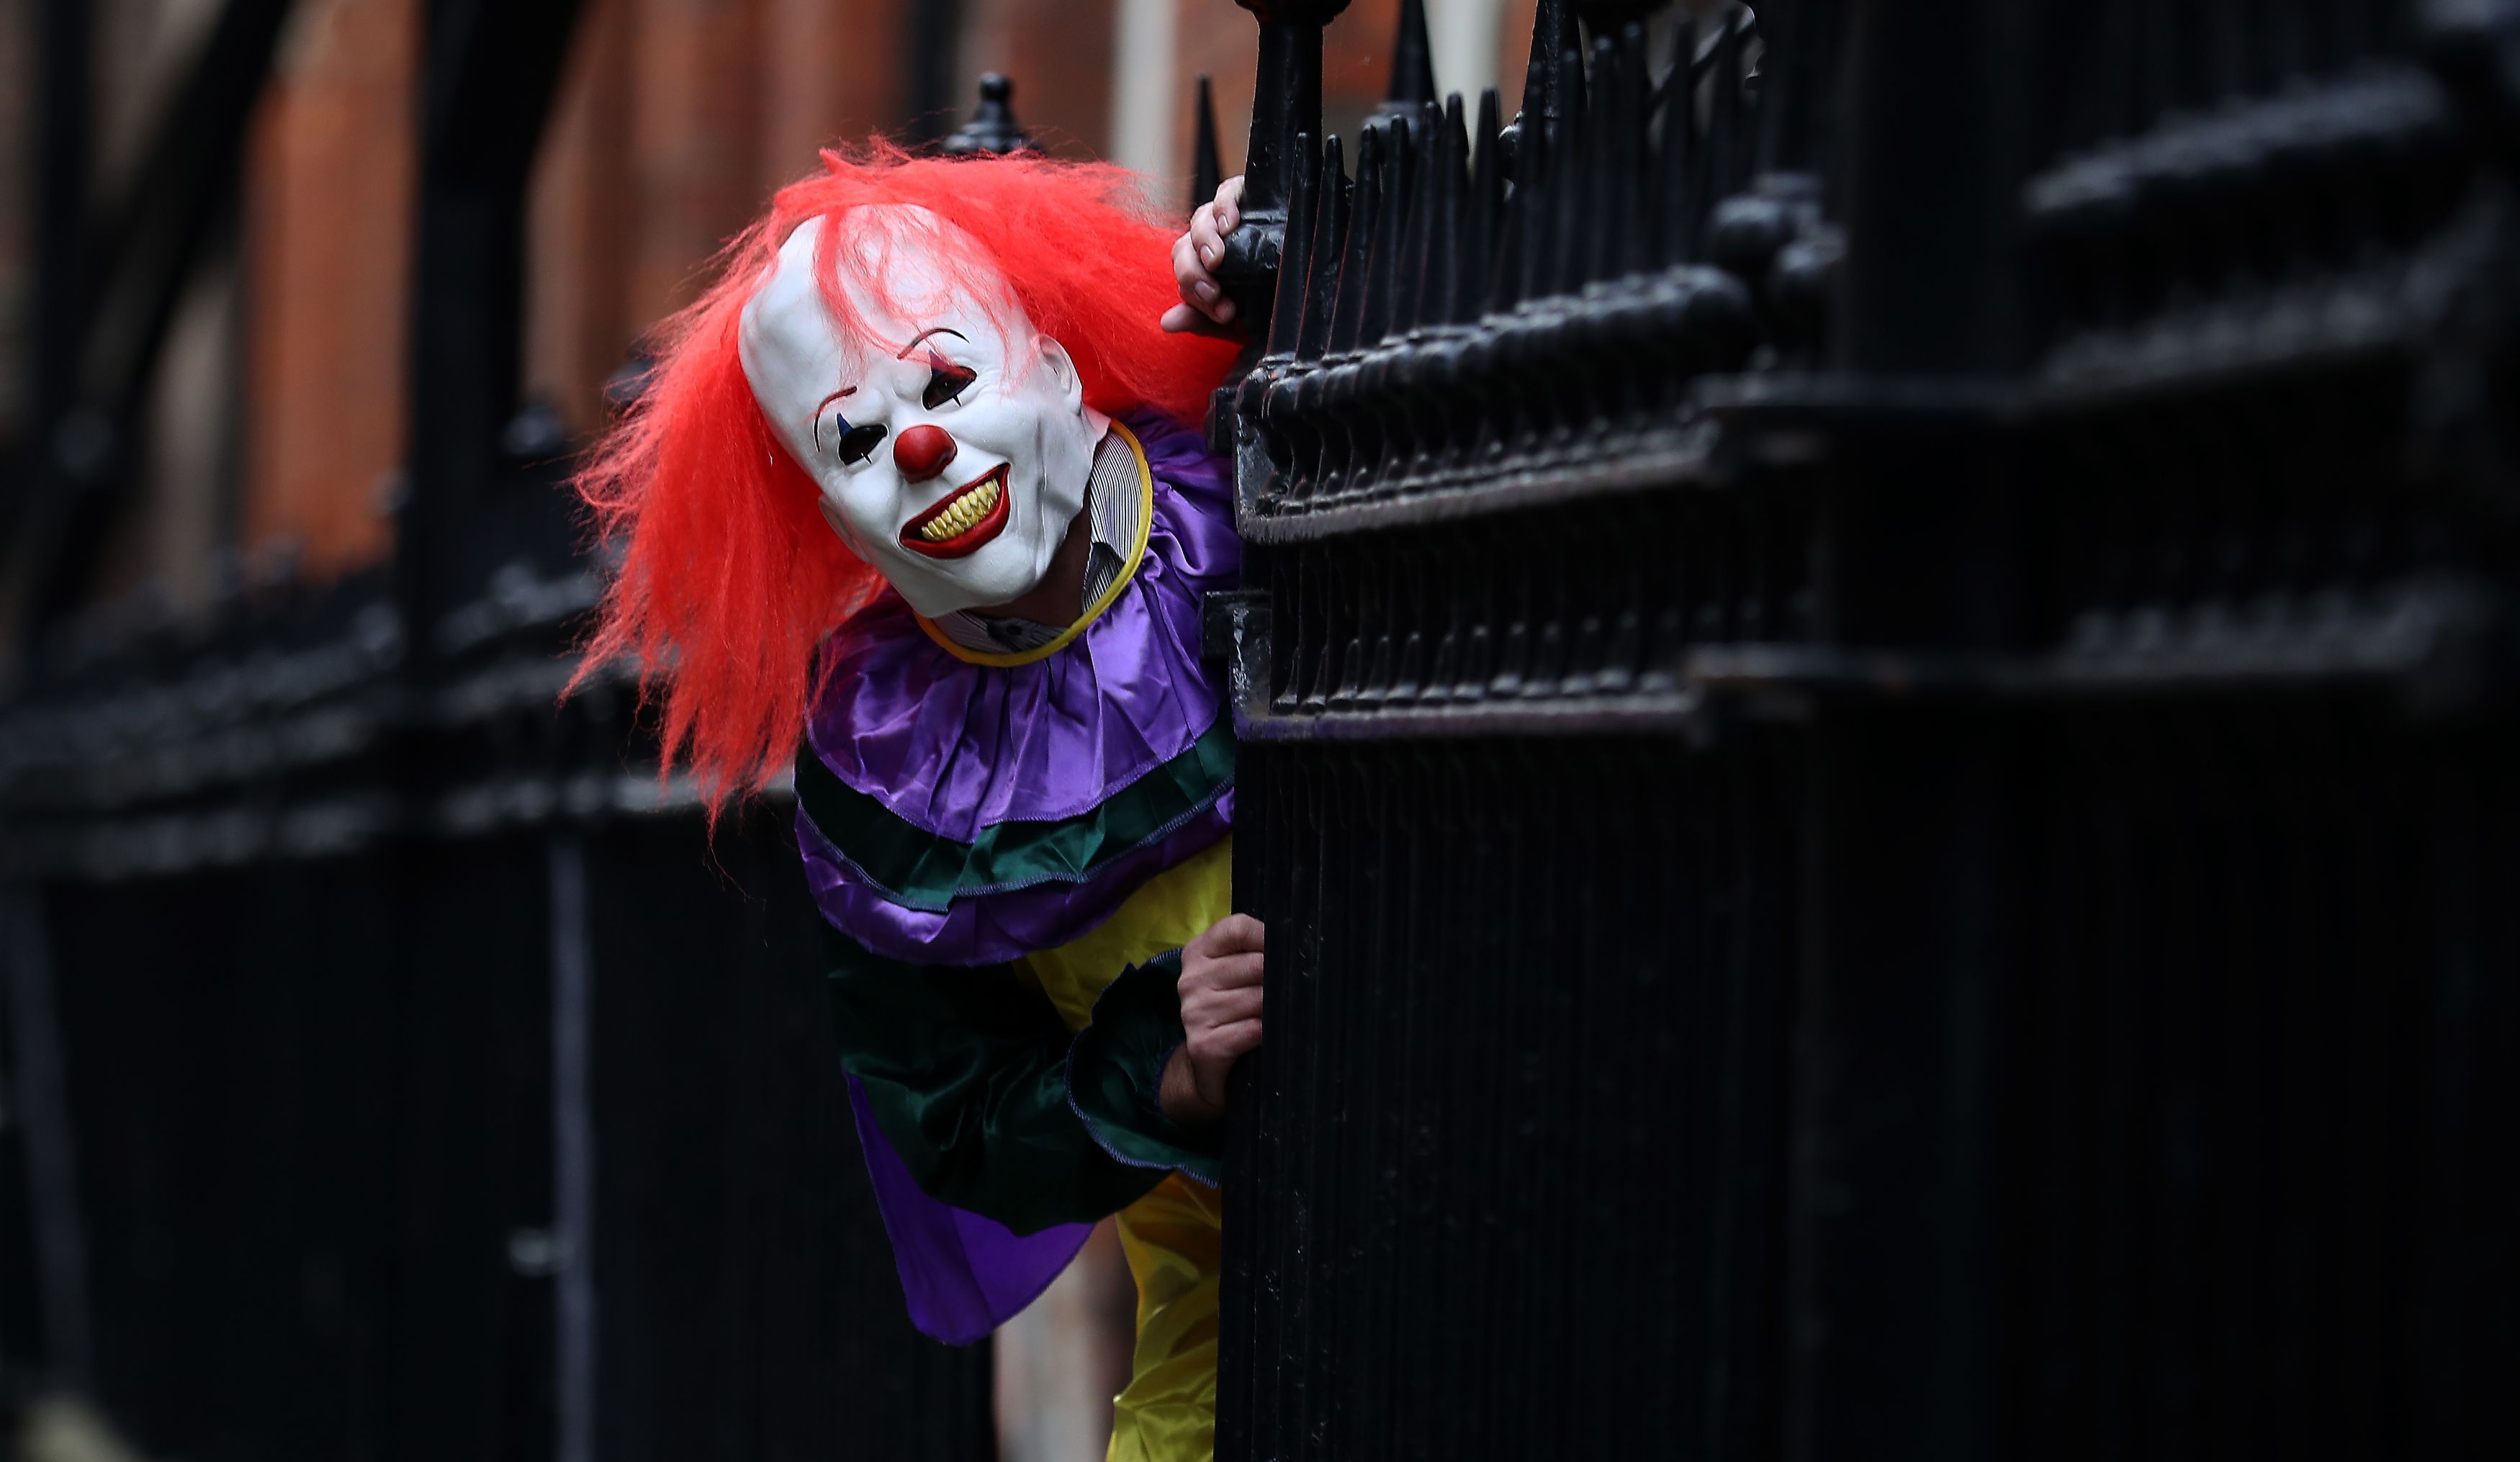 The Bizarre Killer Clown Craze Is Wasting Police Resources 